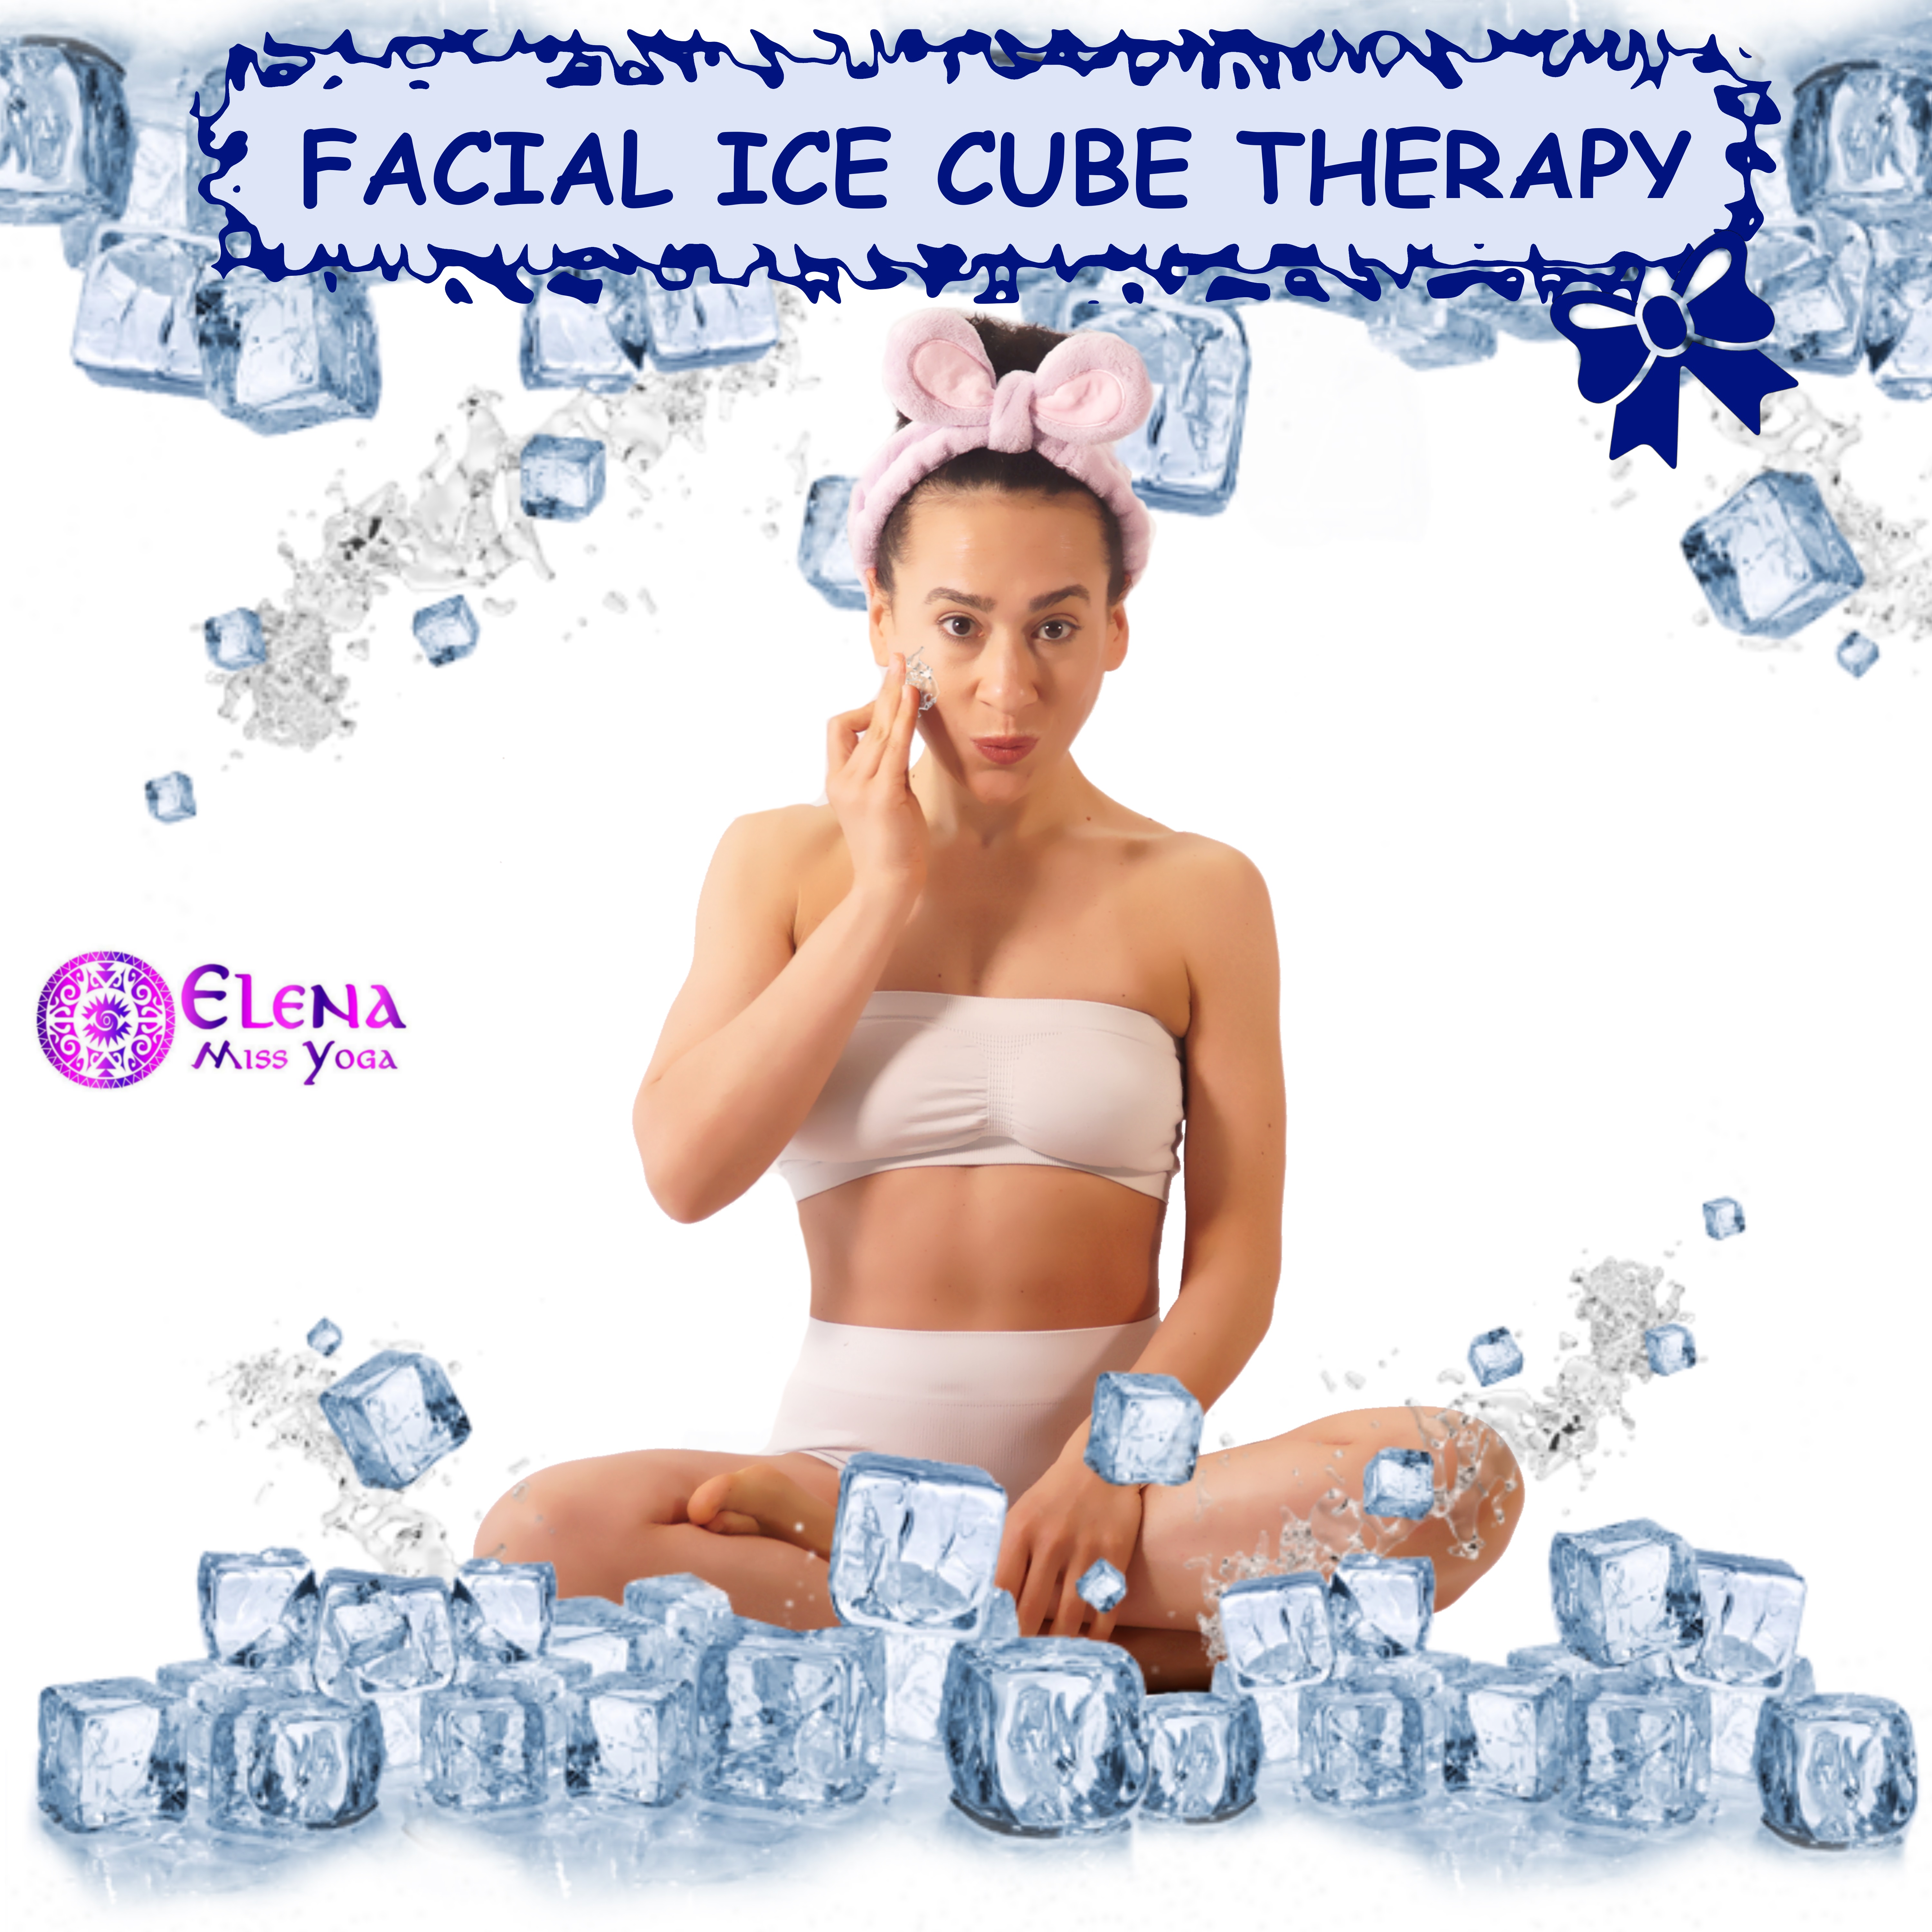 FACIAL ICE CUBE THERAPY